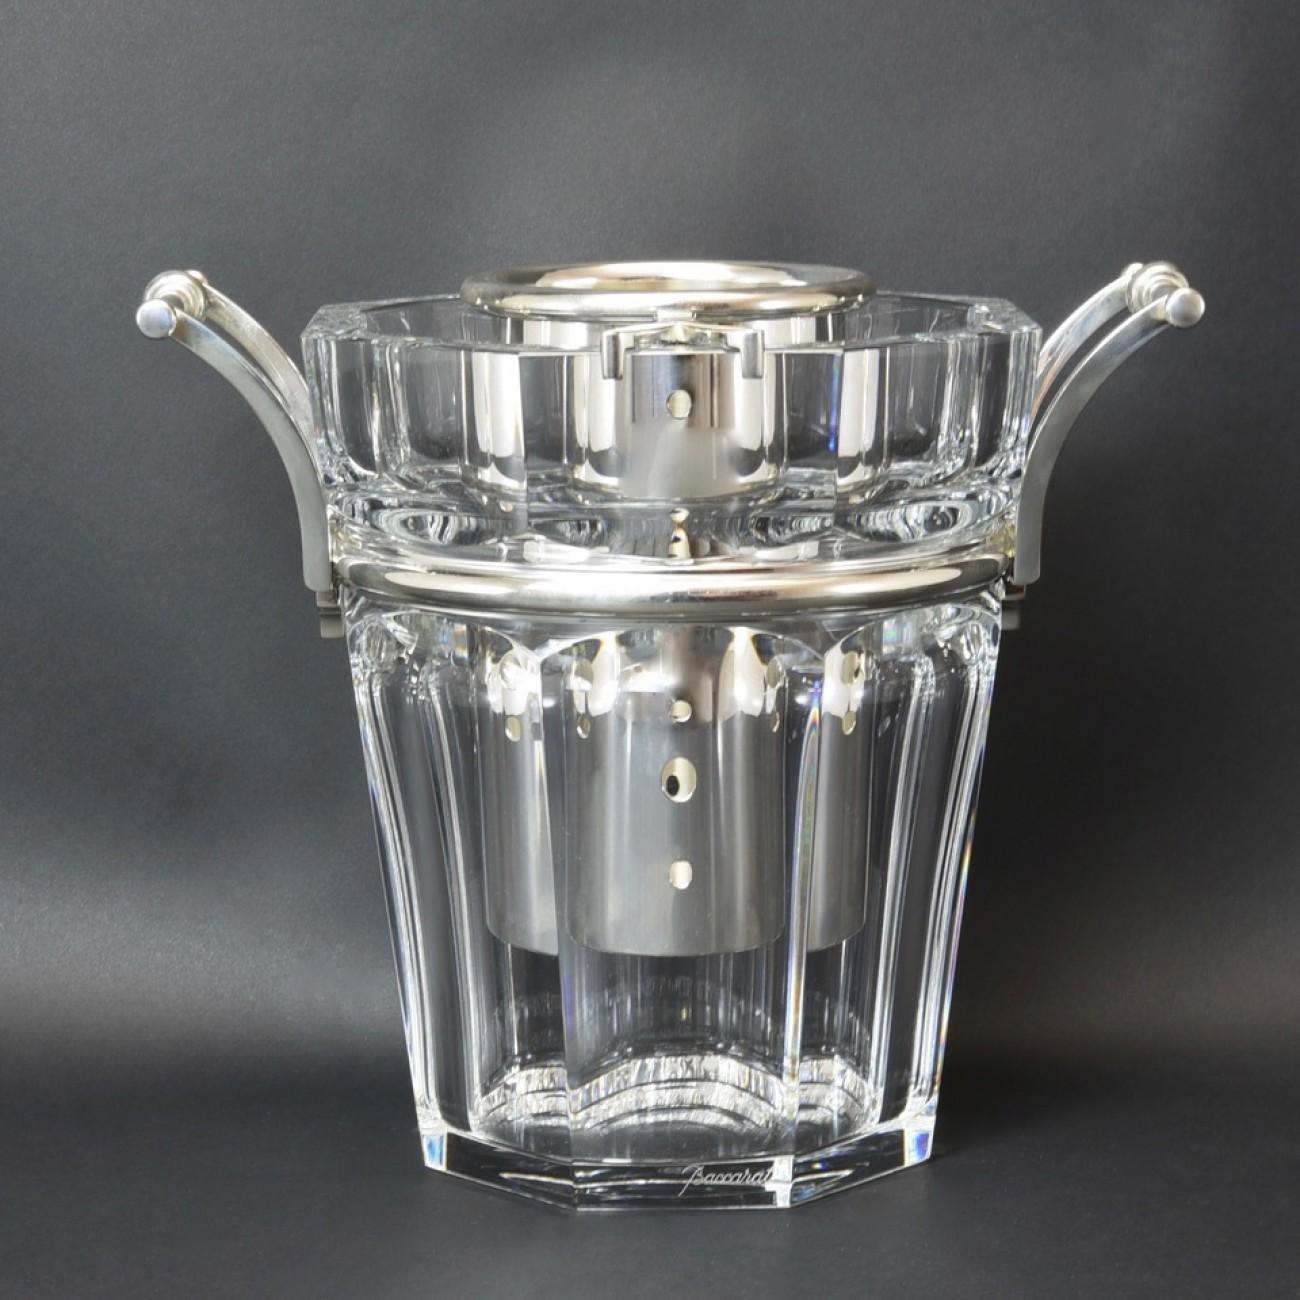 A superb Baccarat octagonal cut crystal and silver plate wine cooler (model 'Moulin Rouge') designed so the bottle can sit upright in a purpose made cradle if so desired or it can be used without the cradle so the bottle sits directly in the ice,